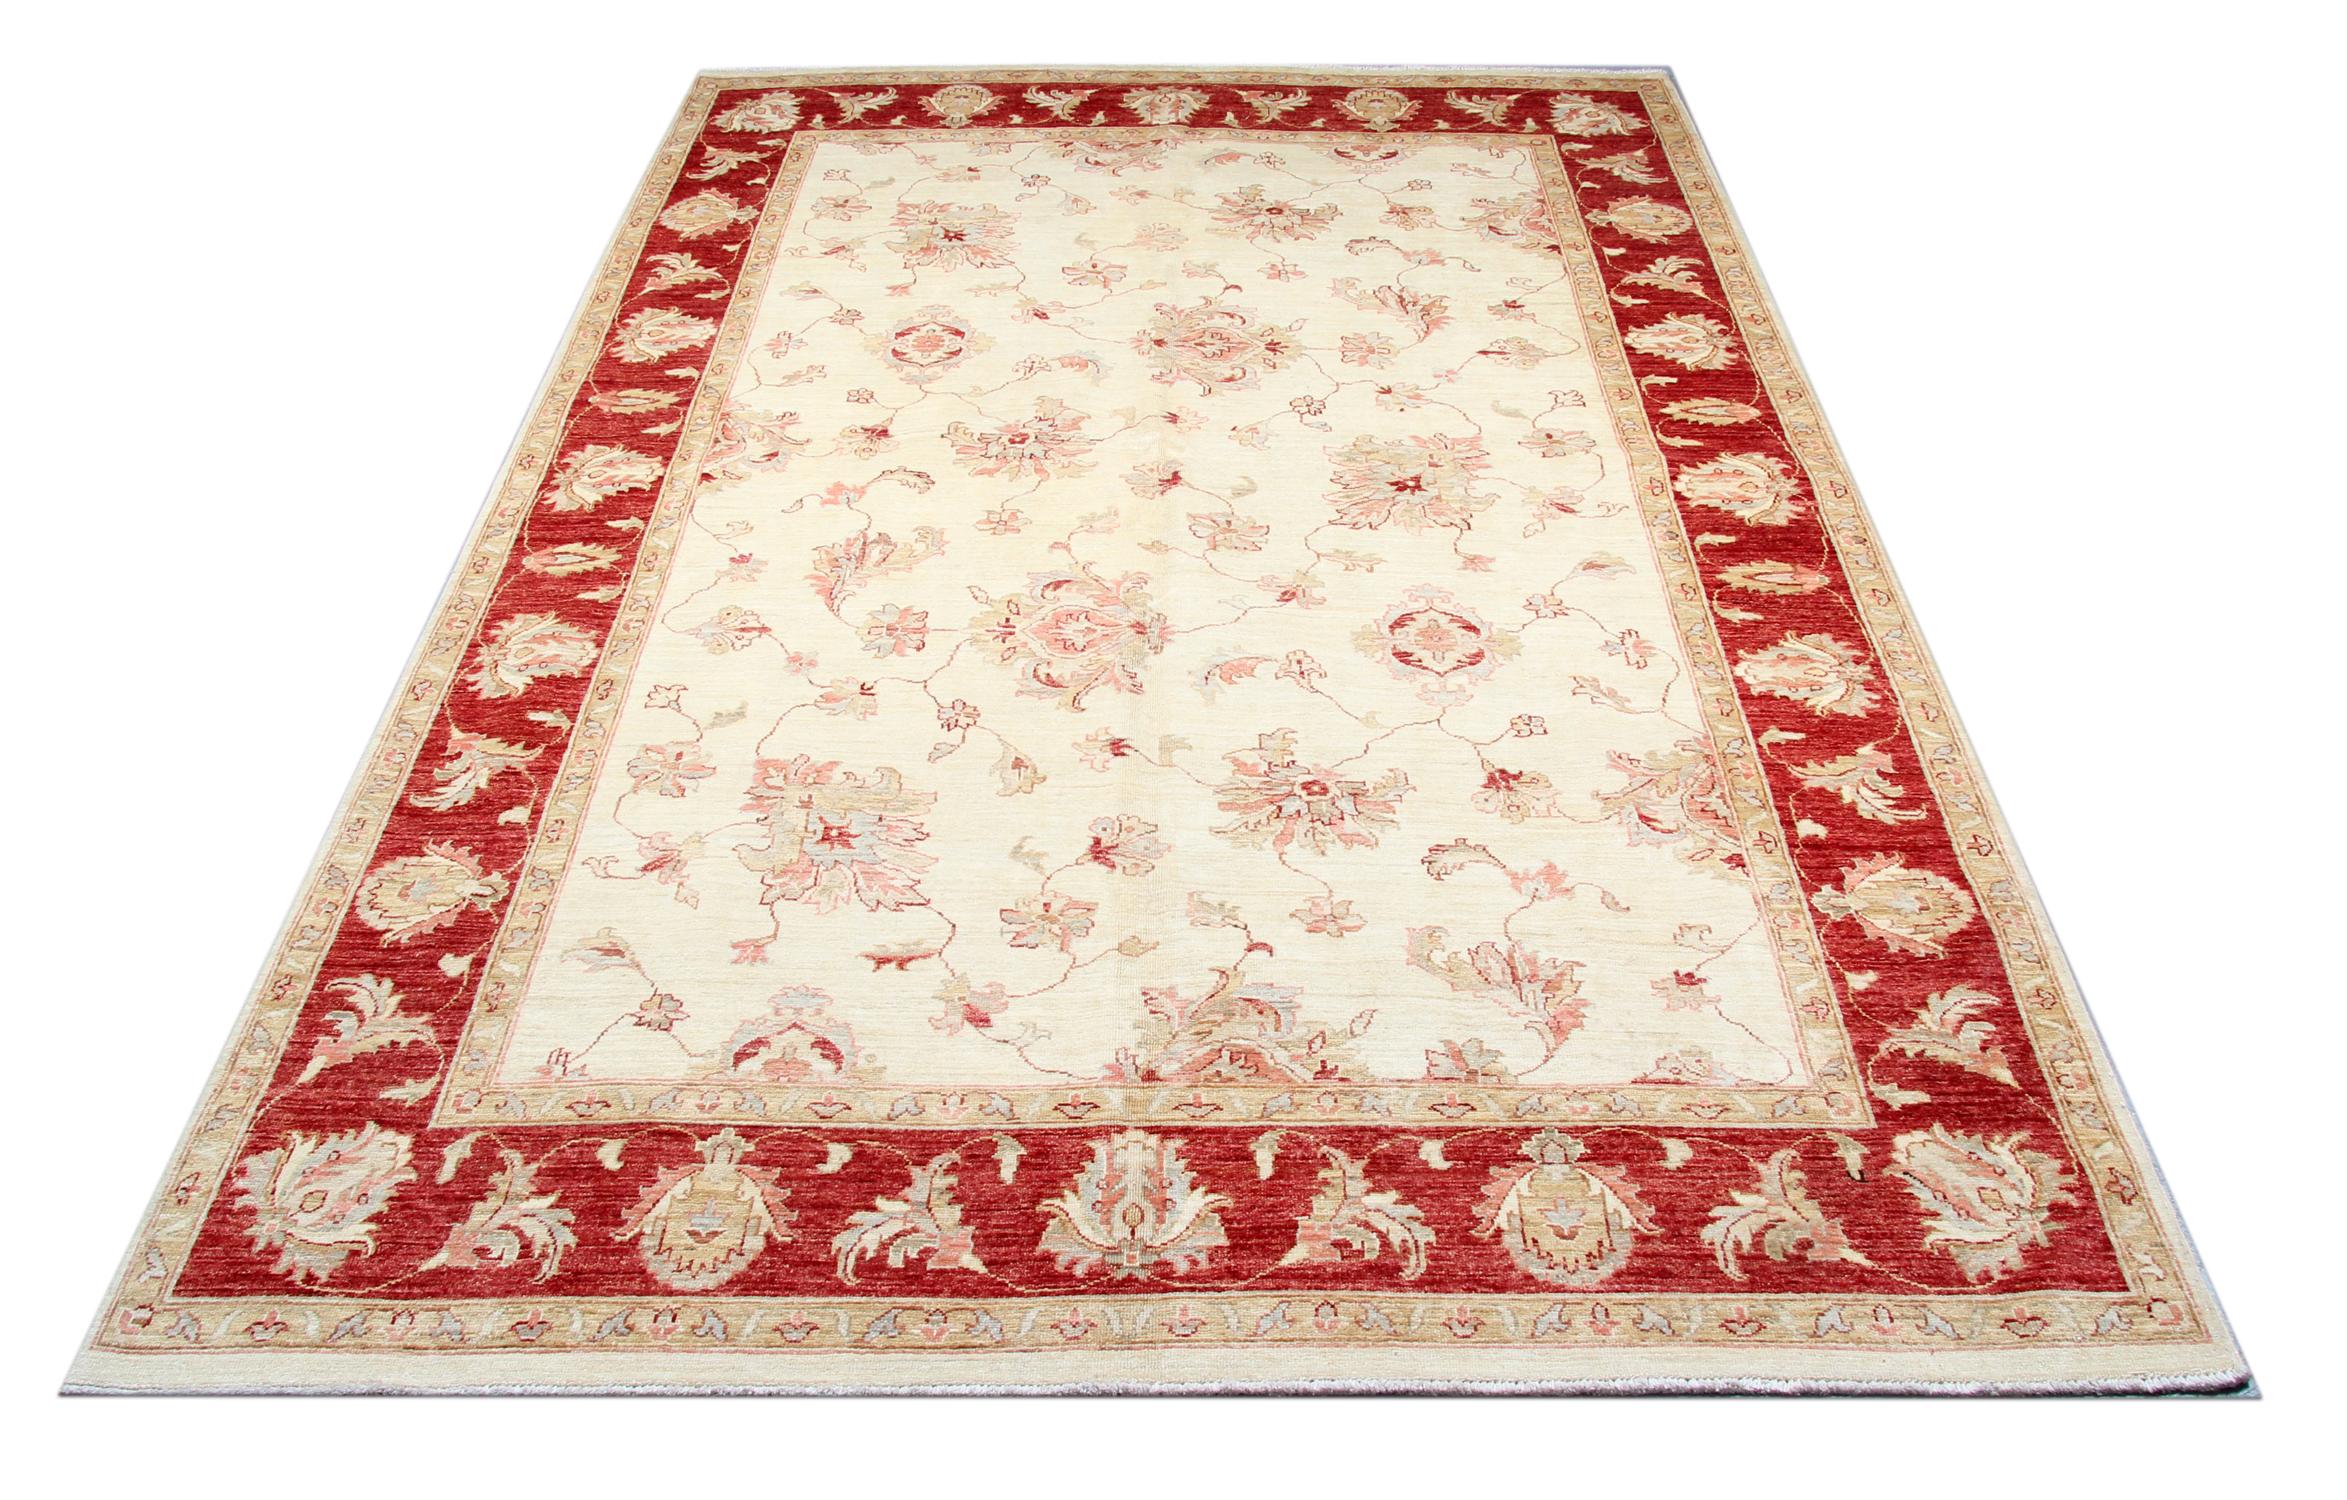 Country Traditional Cream Red Ziegler Carpet Handmade Wool Oriental Area Rug For Sale